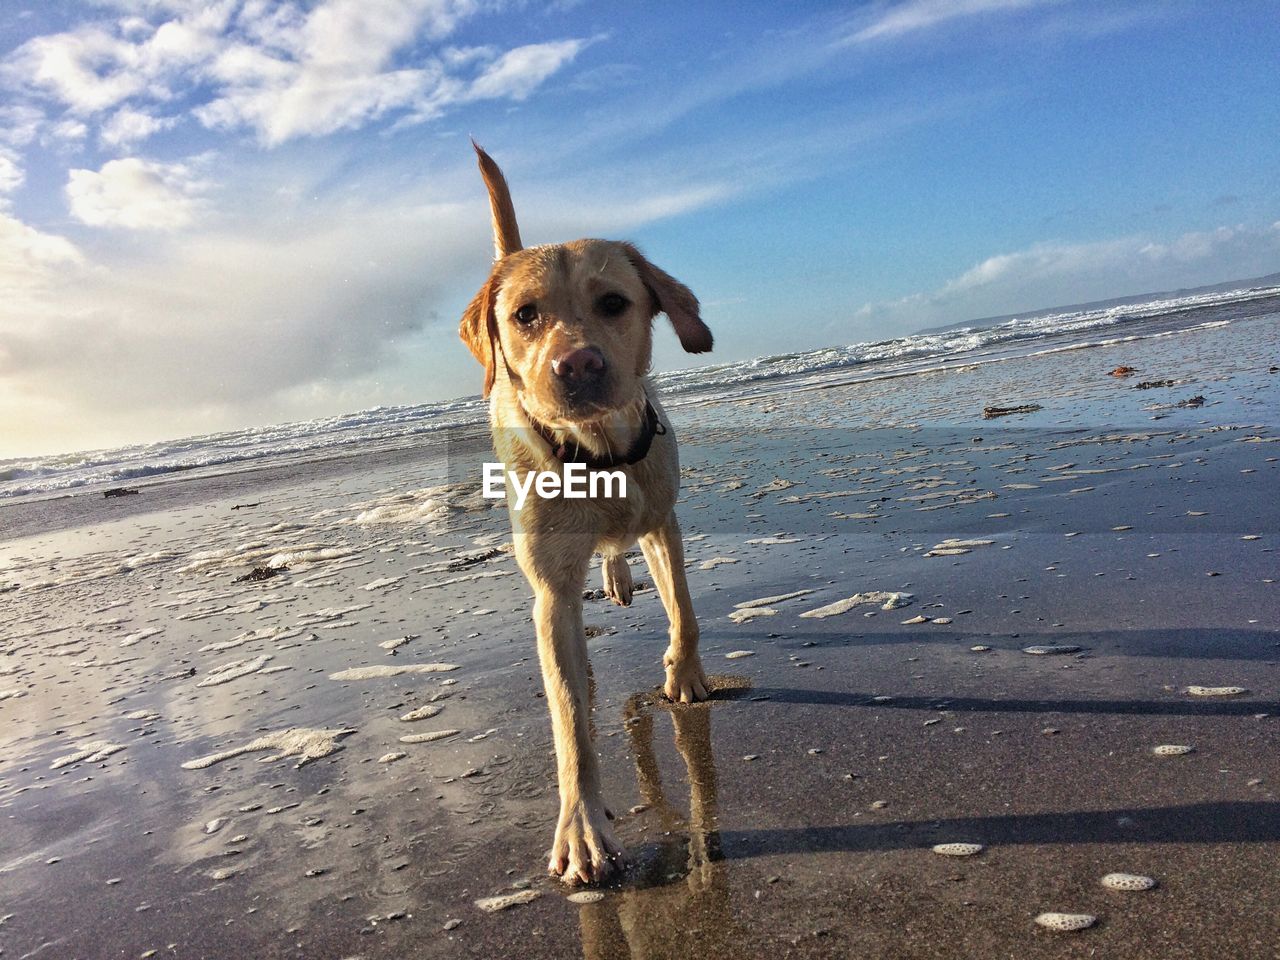 Close-up portrait of dog standing at beach against sky